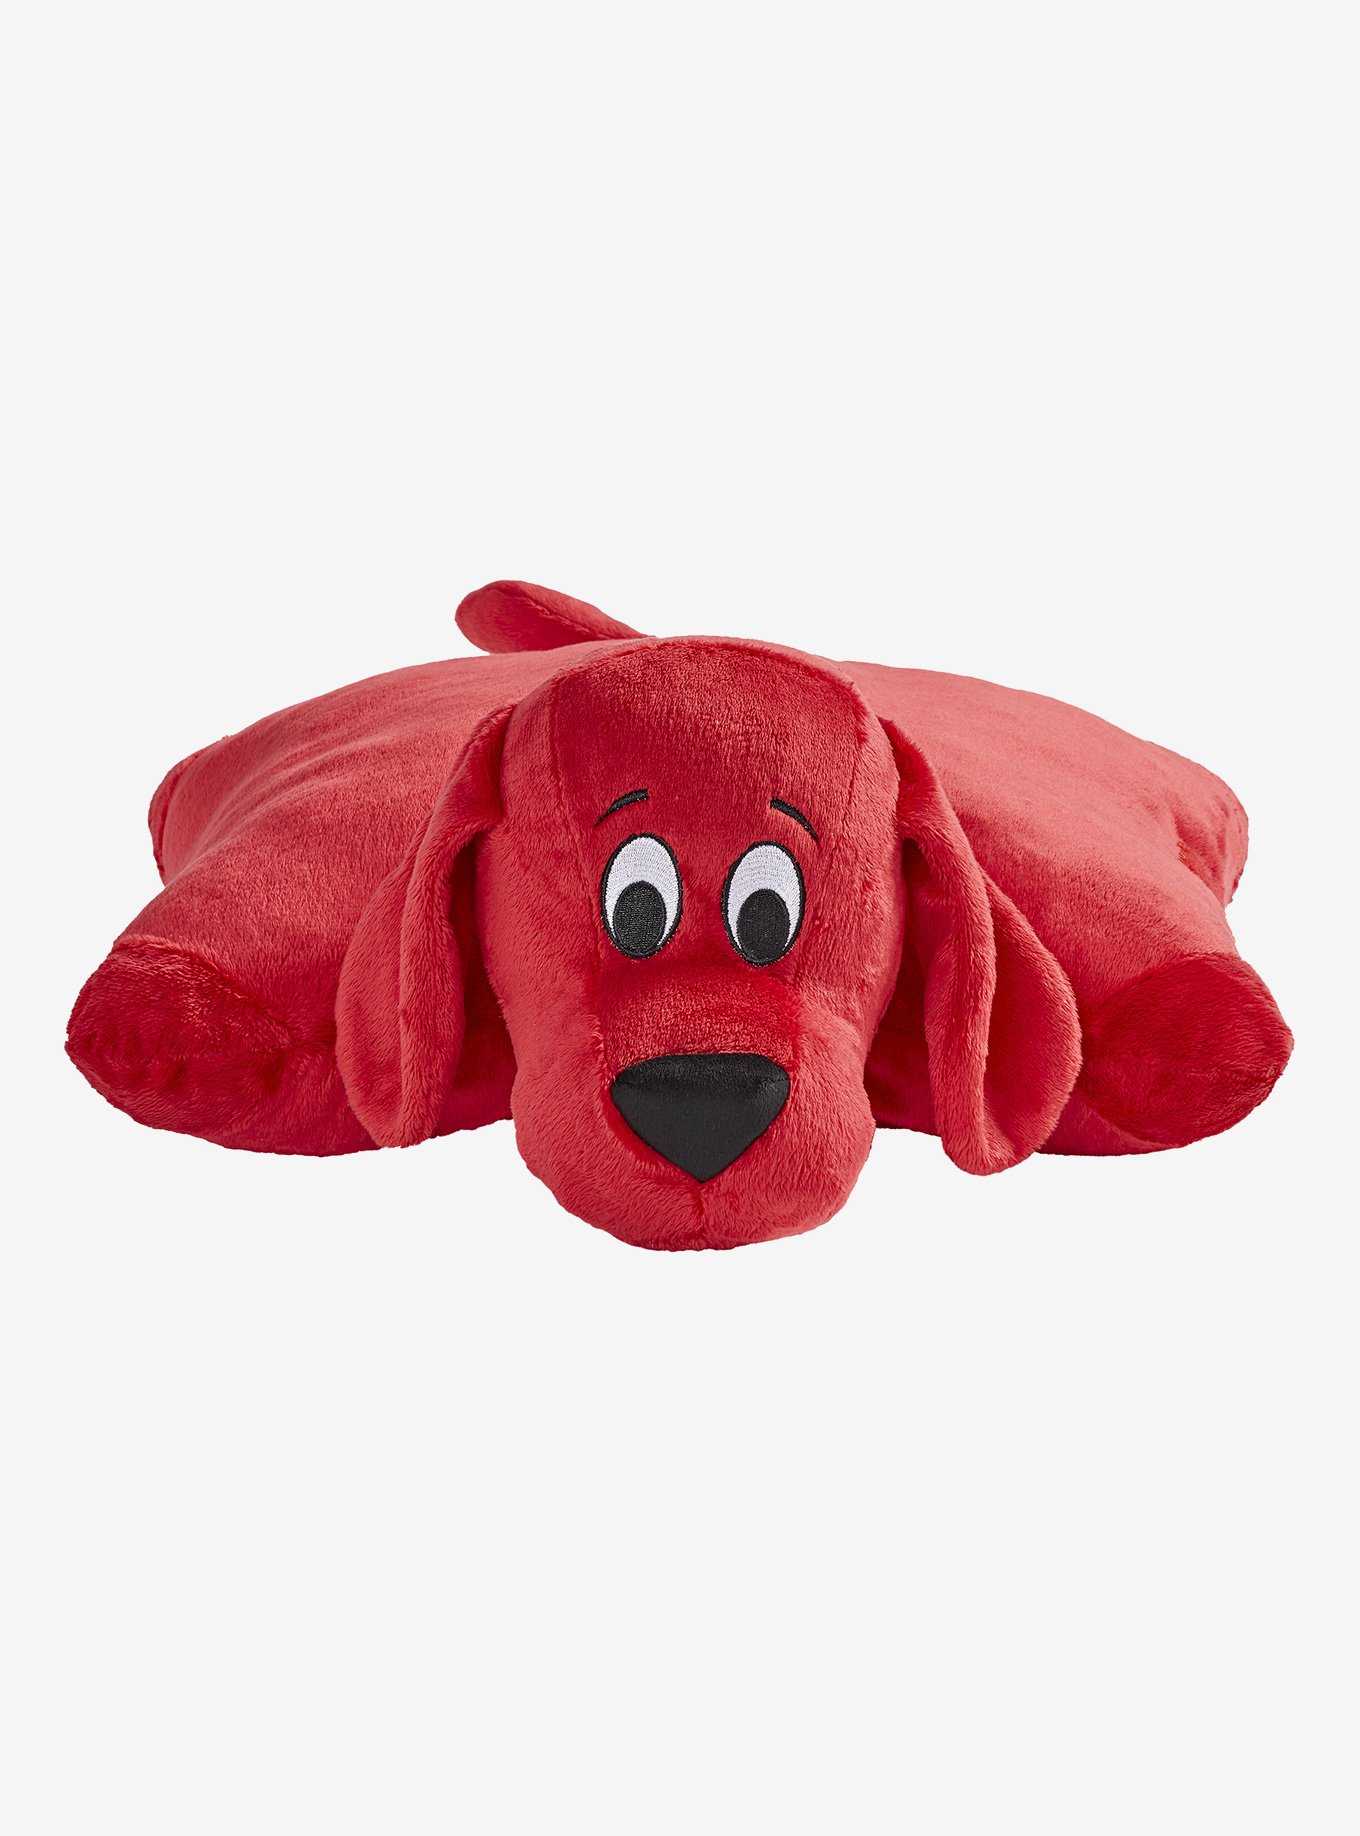 Clifford The Big Red Dog Pillow Pets Plush Toy, , hi-res